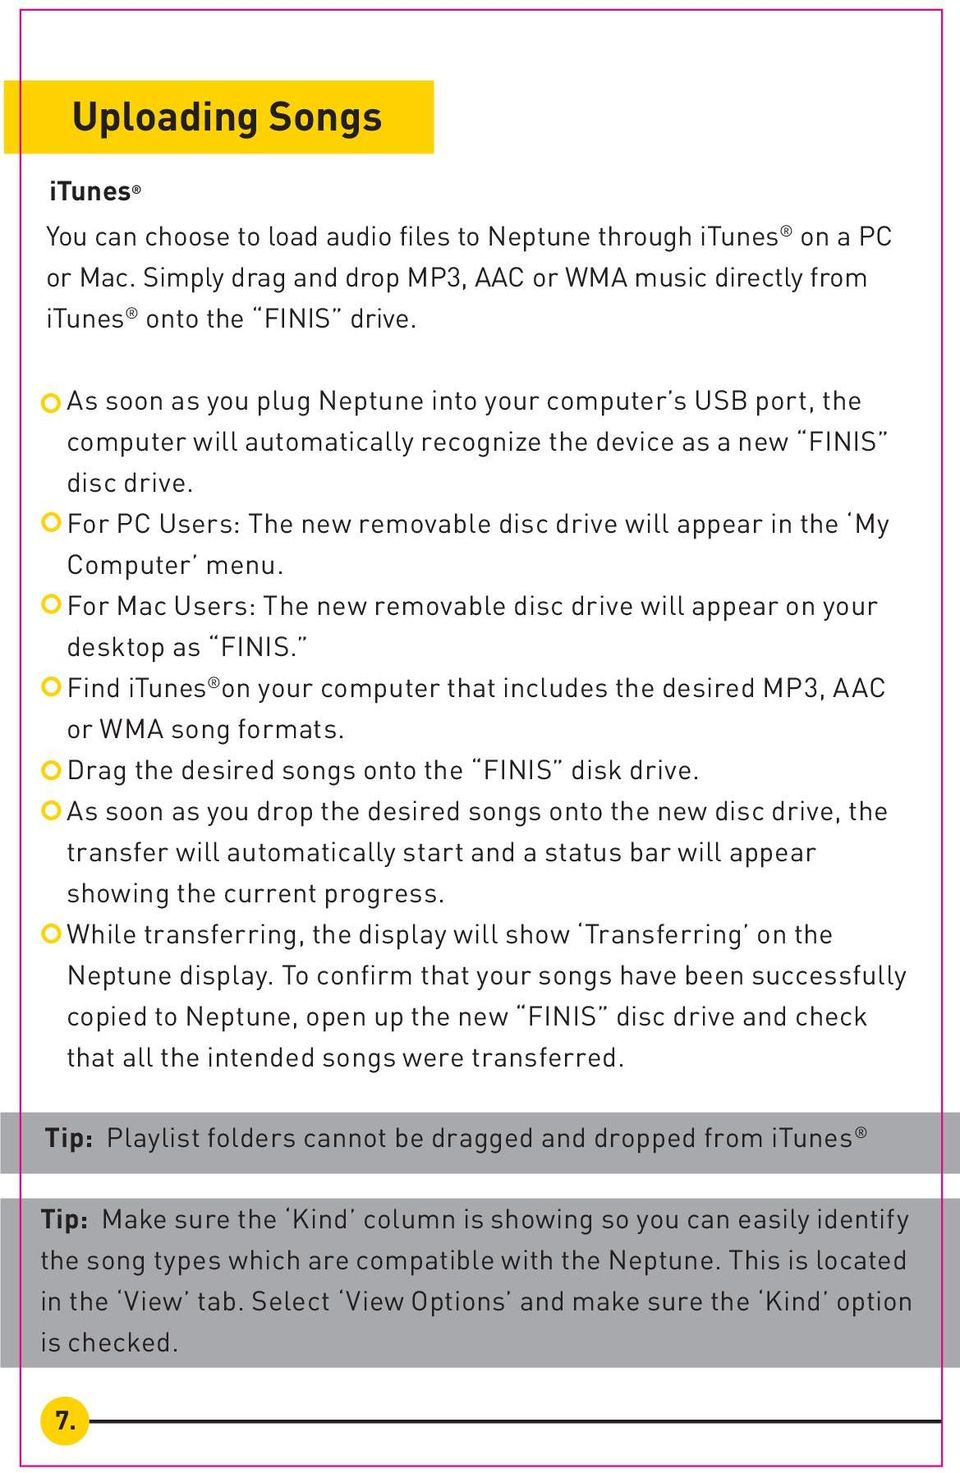 For PC Users: The new removable disc drive will appear in the My Computer menu. For Mac Users: The new removable disc drive will appear on your desktop as FINIS.